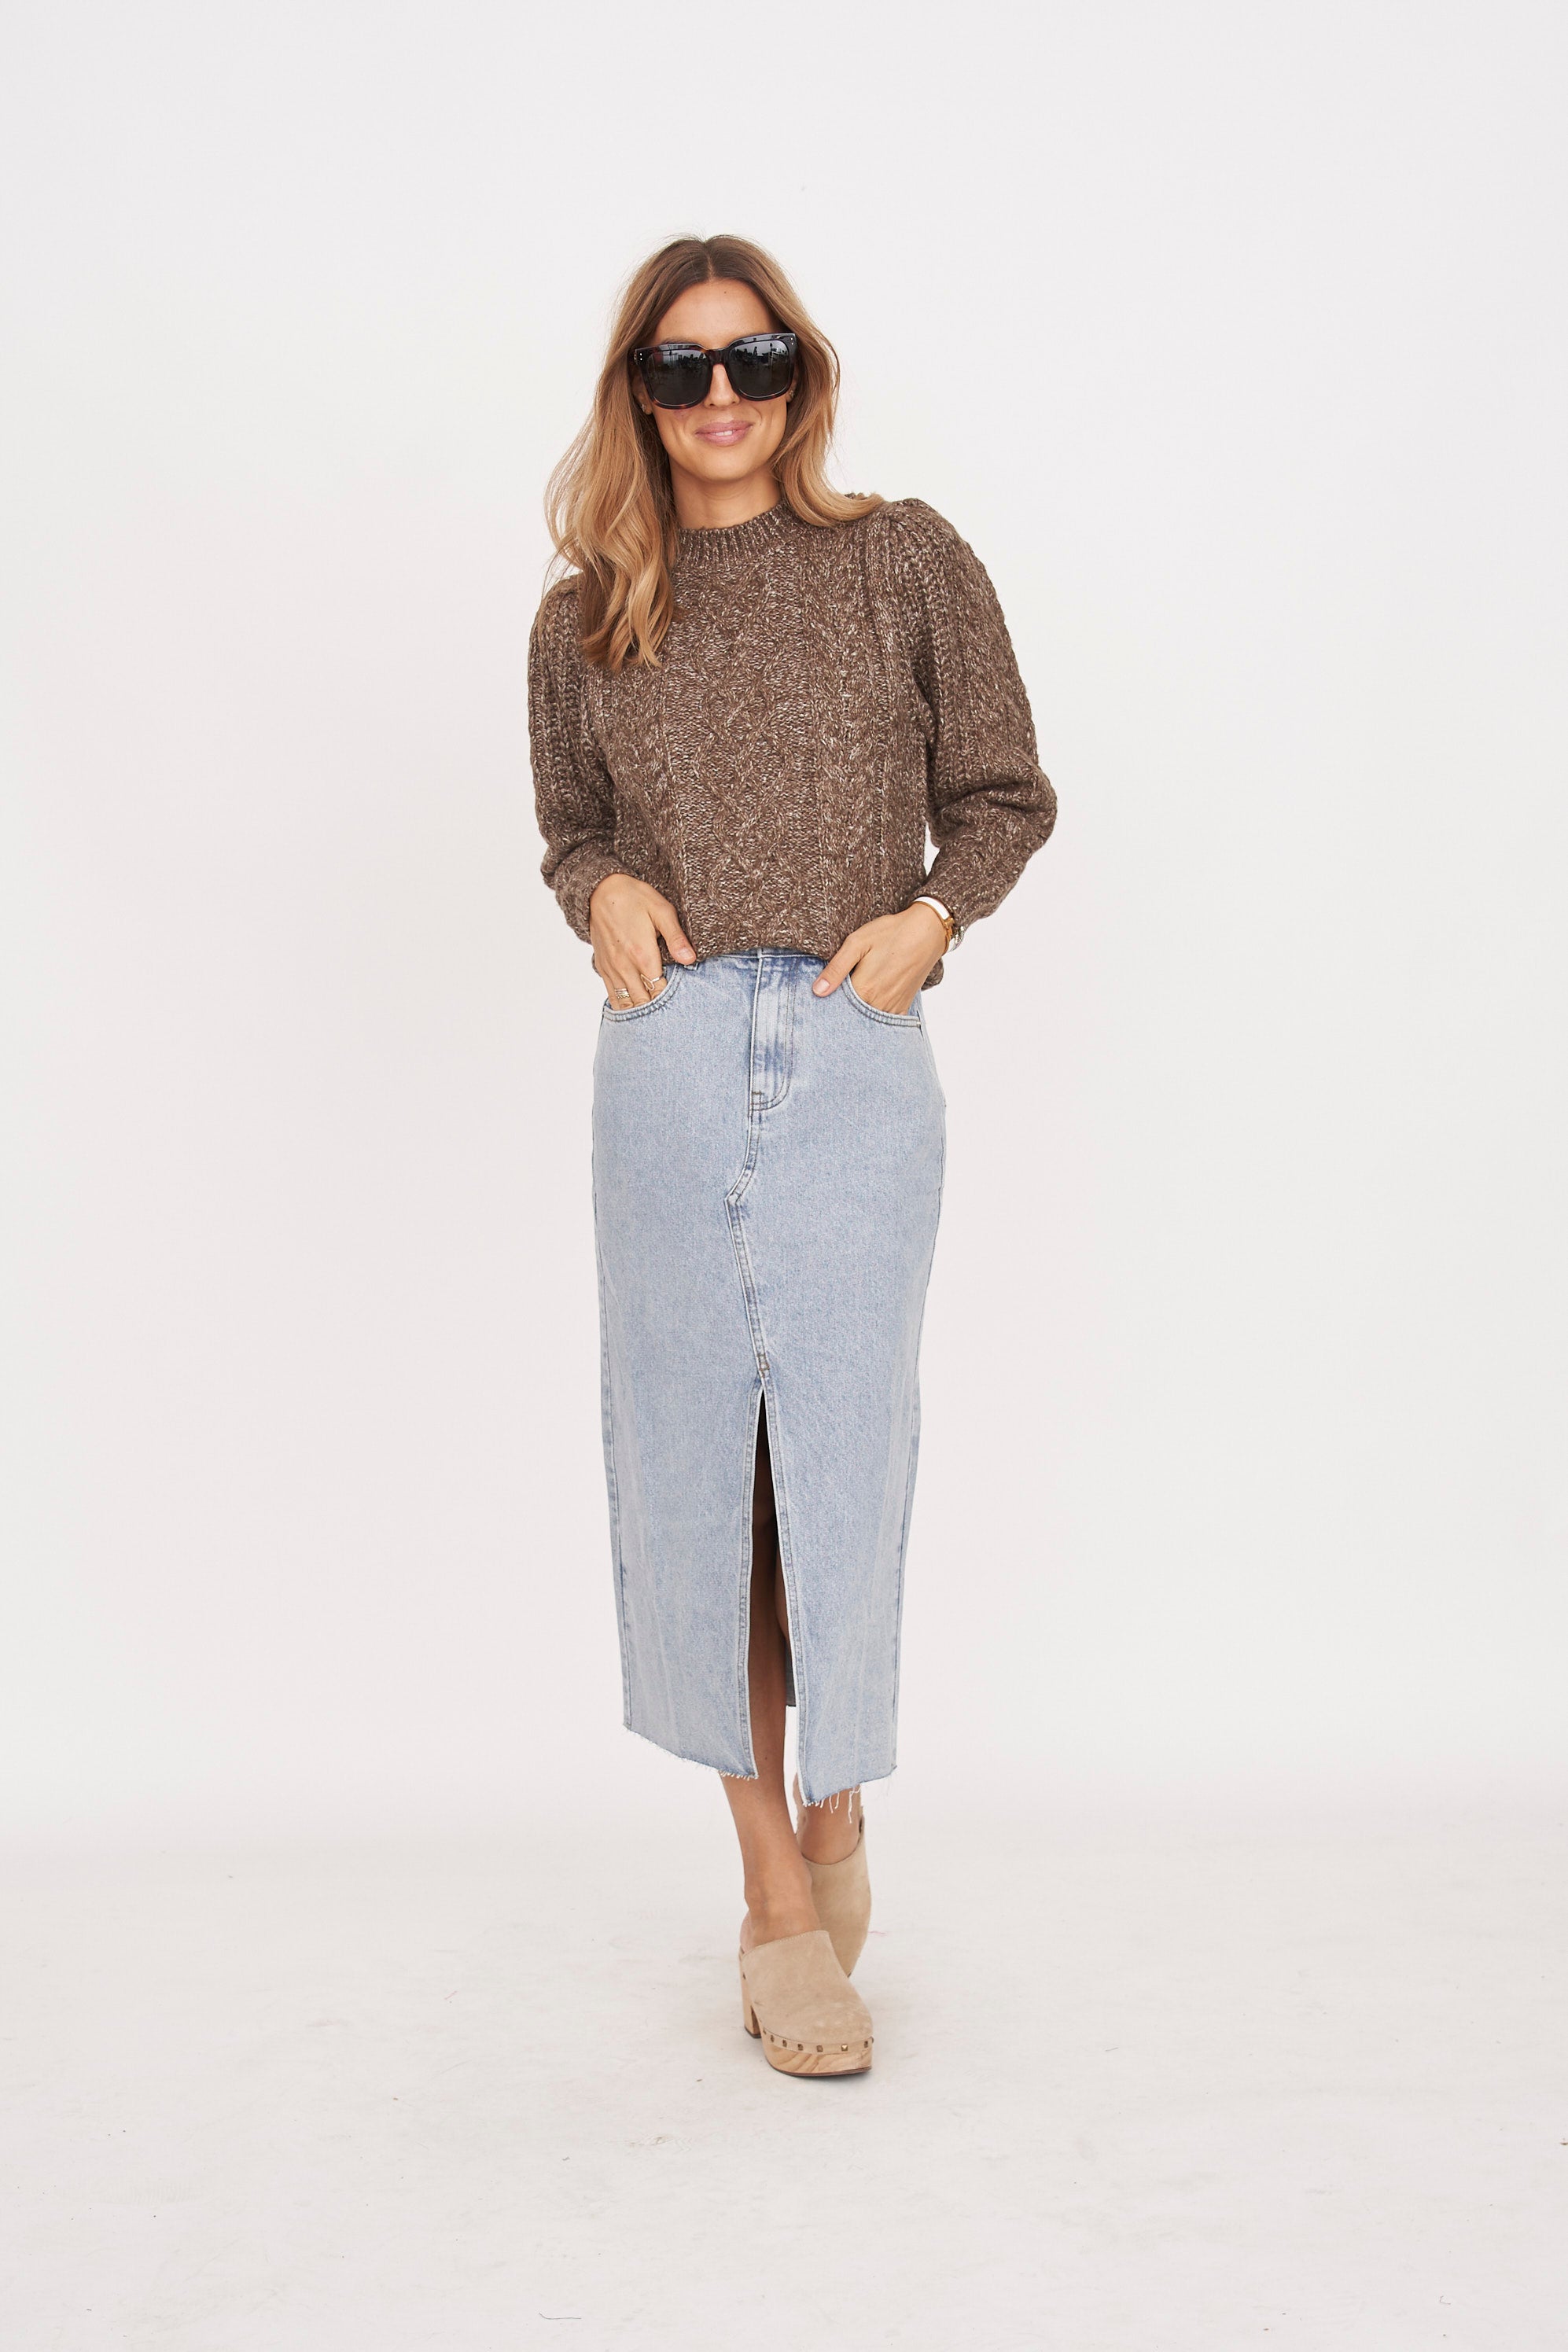 Lucia Cable Knit Sweater